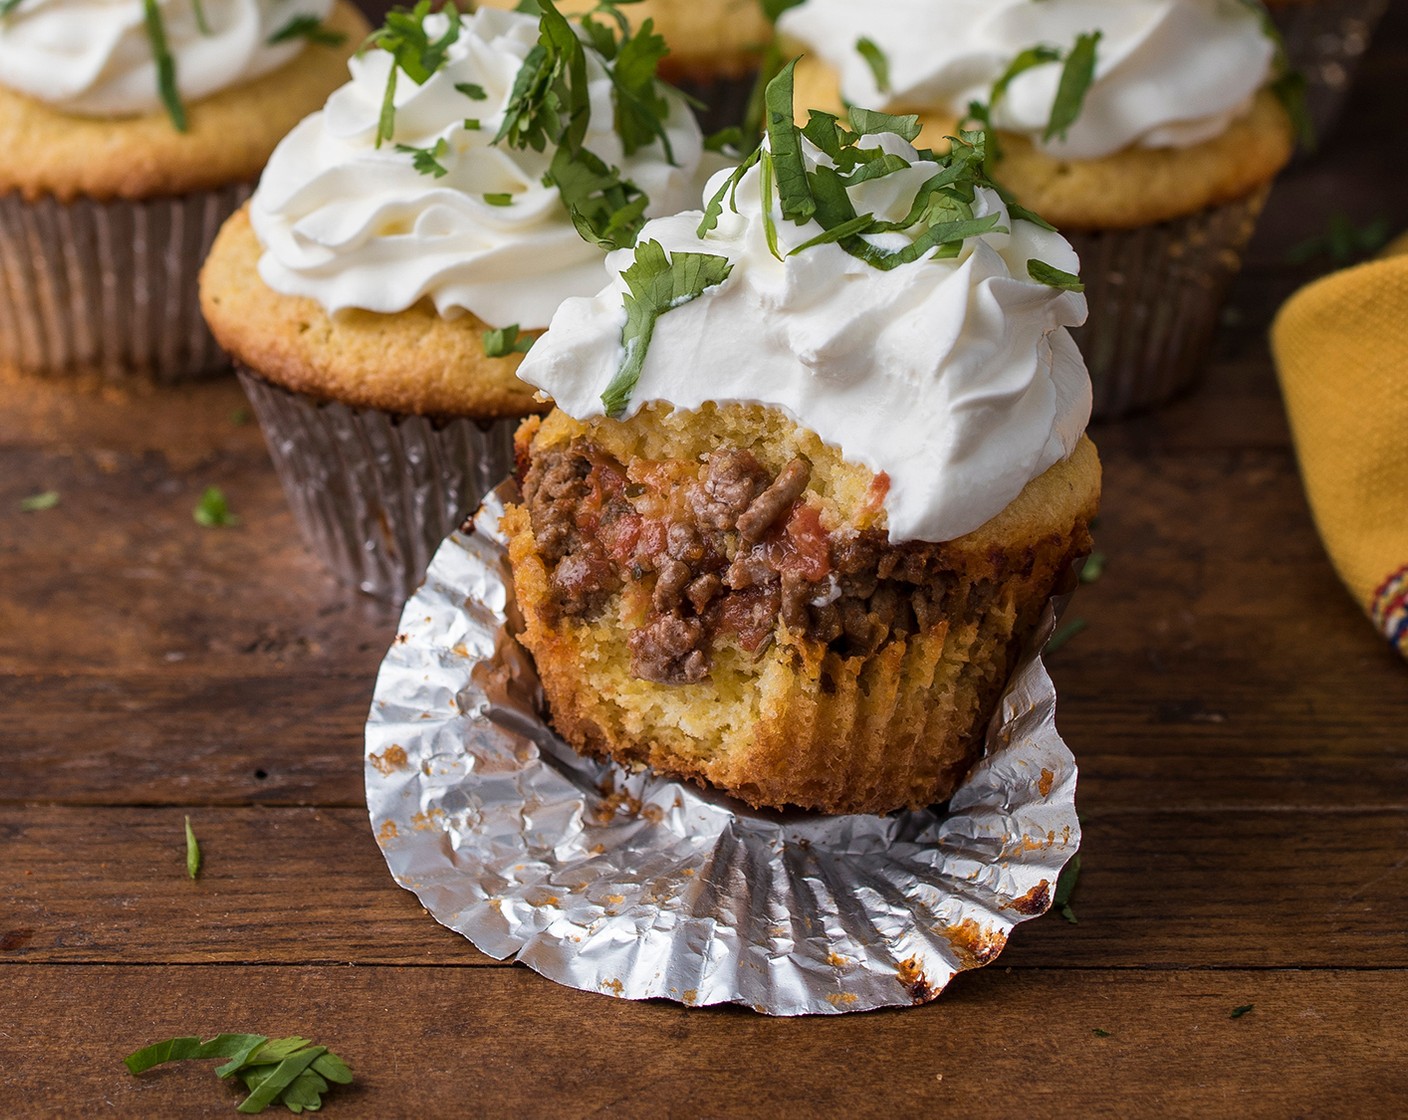 step 4 Bake for 15 to 17 minutes or until a toothpick inserted into the cupcake comes out clean and the cupcakes are golden brown. Cool the cupcakes slightly. Frost the tops with Sour Cream (1 1/2 cups). Sprinkle with Fresh Cilantro (to taste).